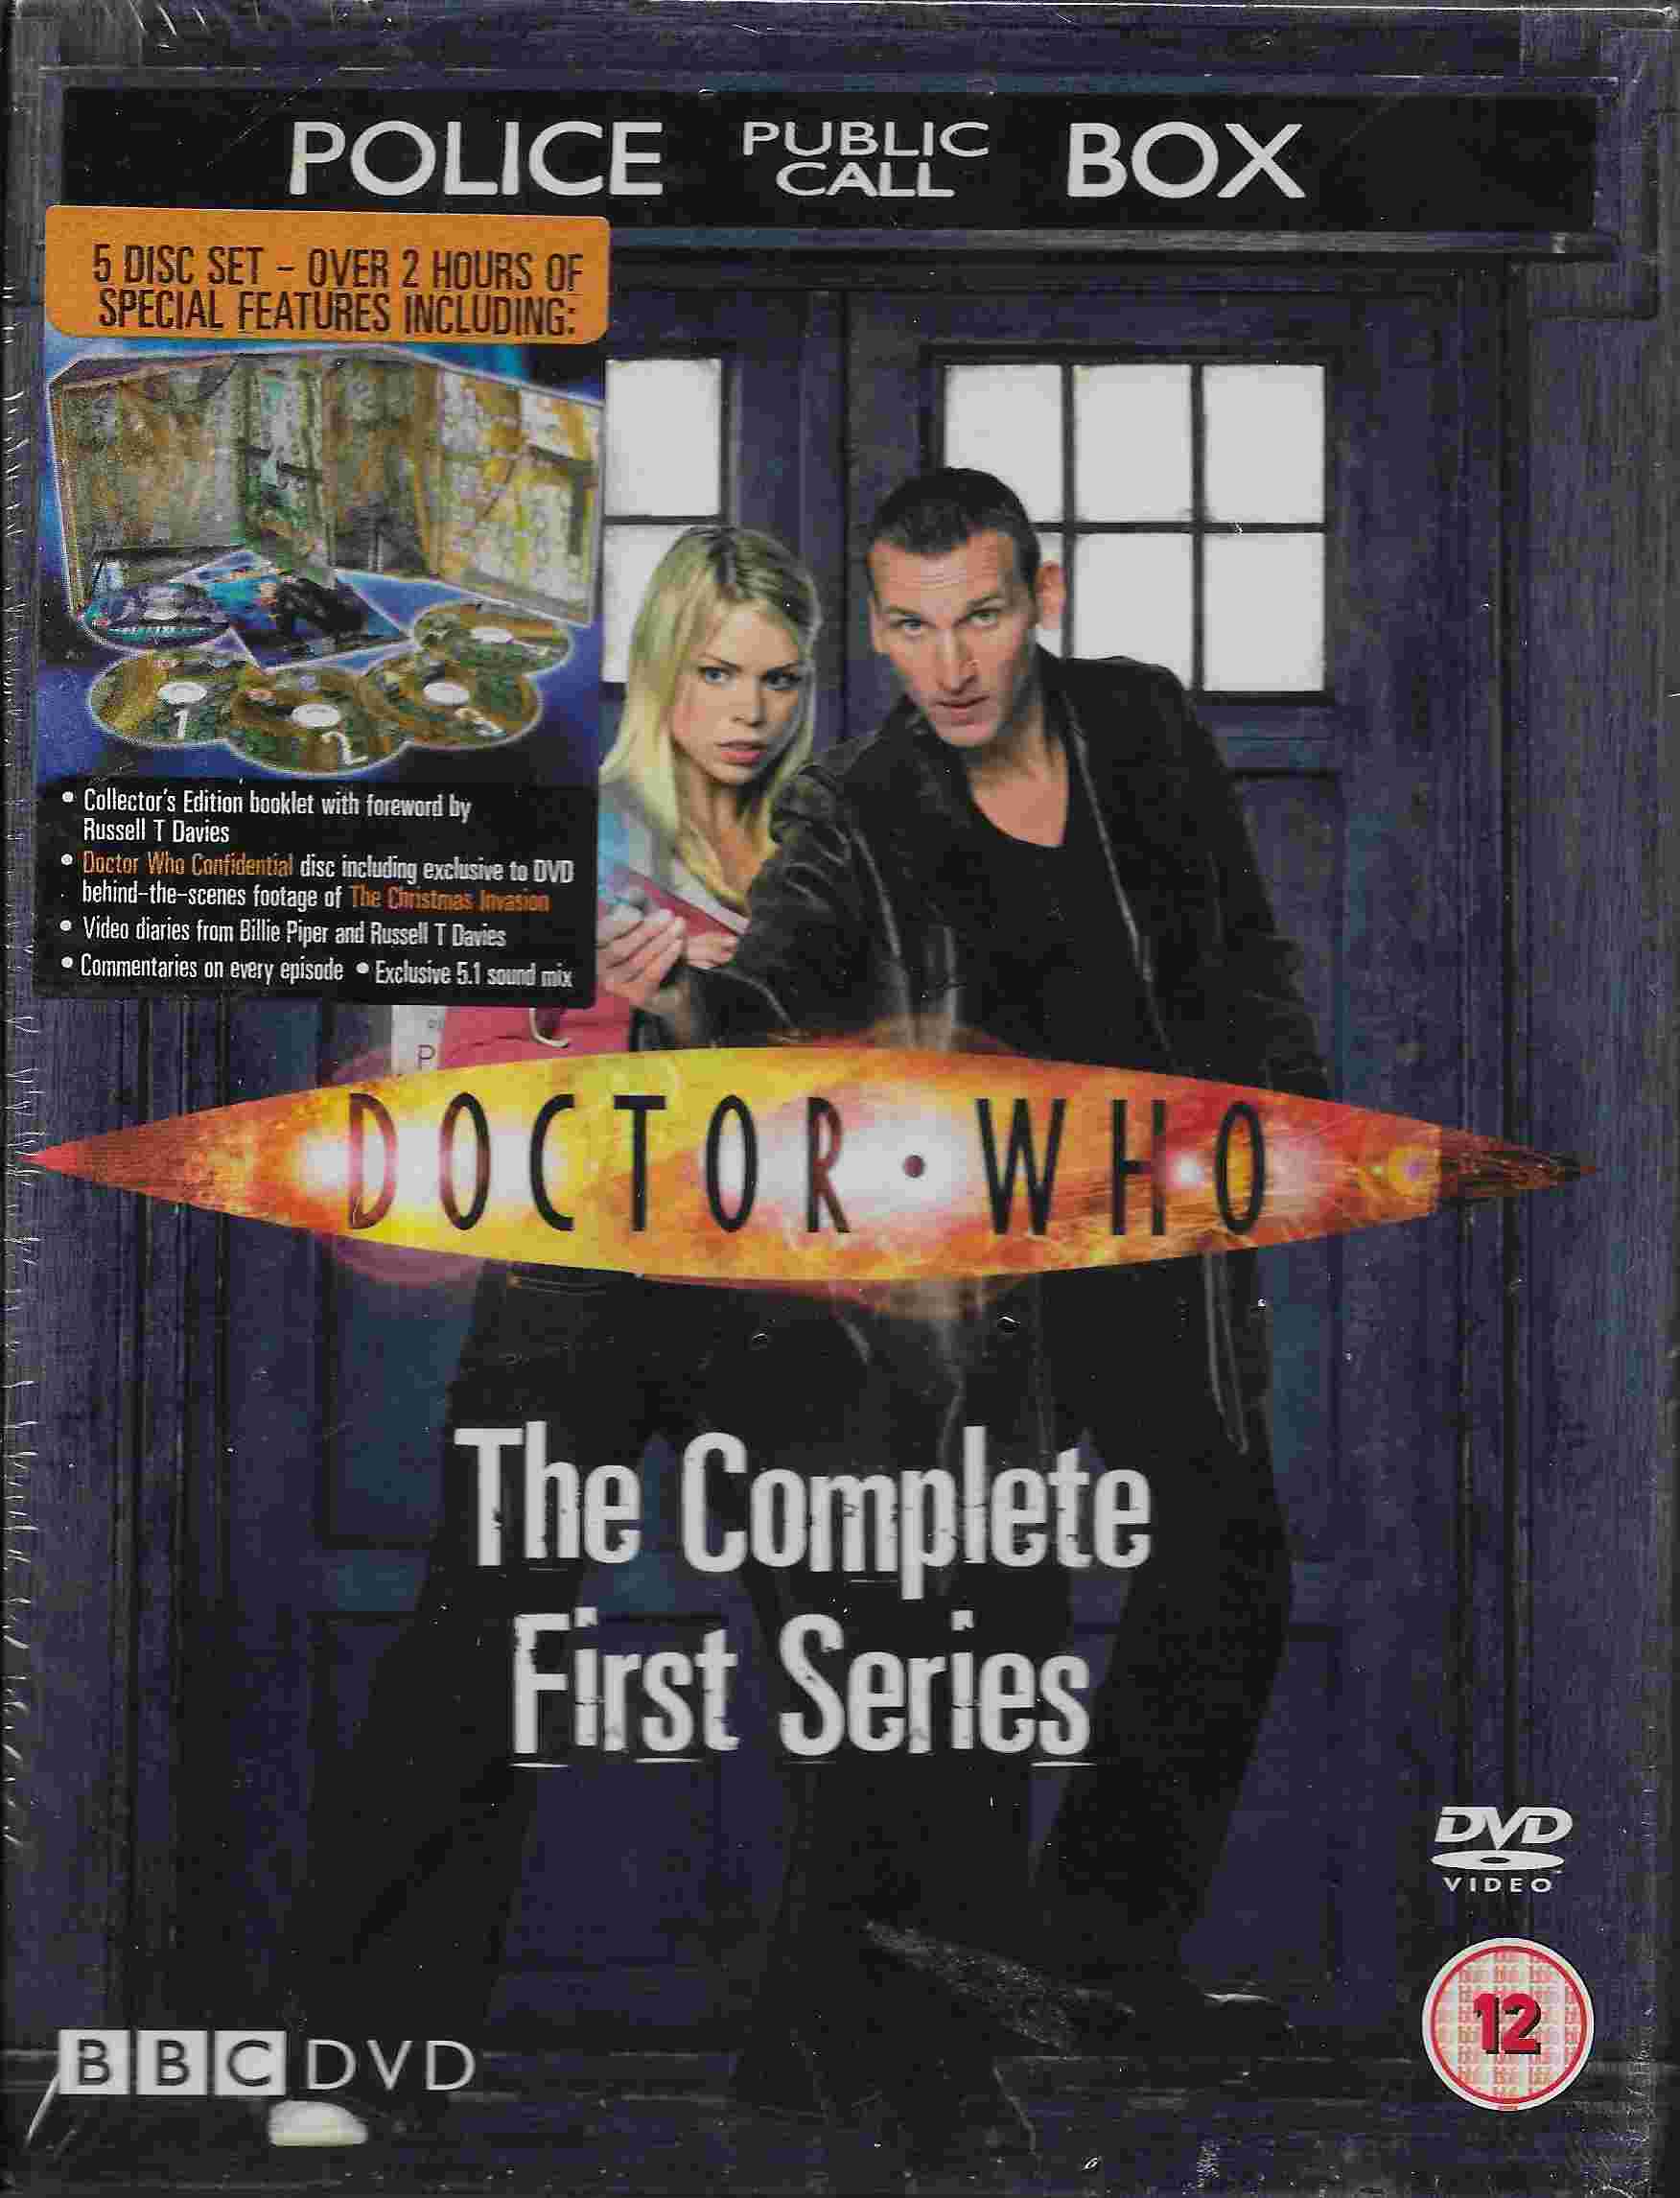 Picture of BBCDVD 1770S Doctor Who - Series 1 by artist Various from the BBC records and Tapes library